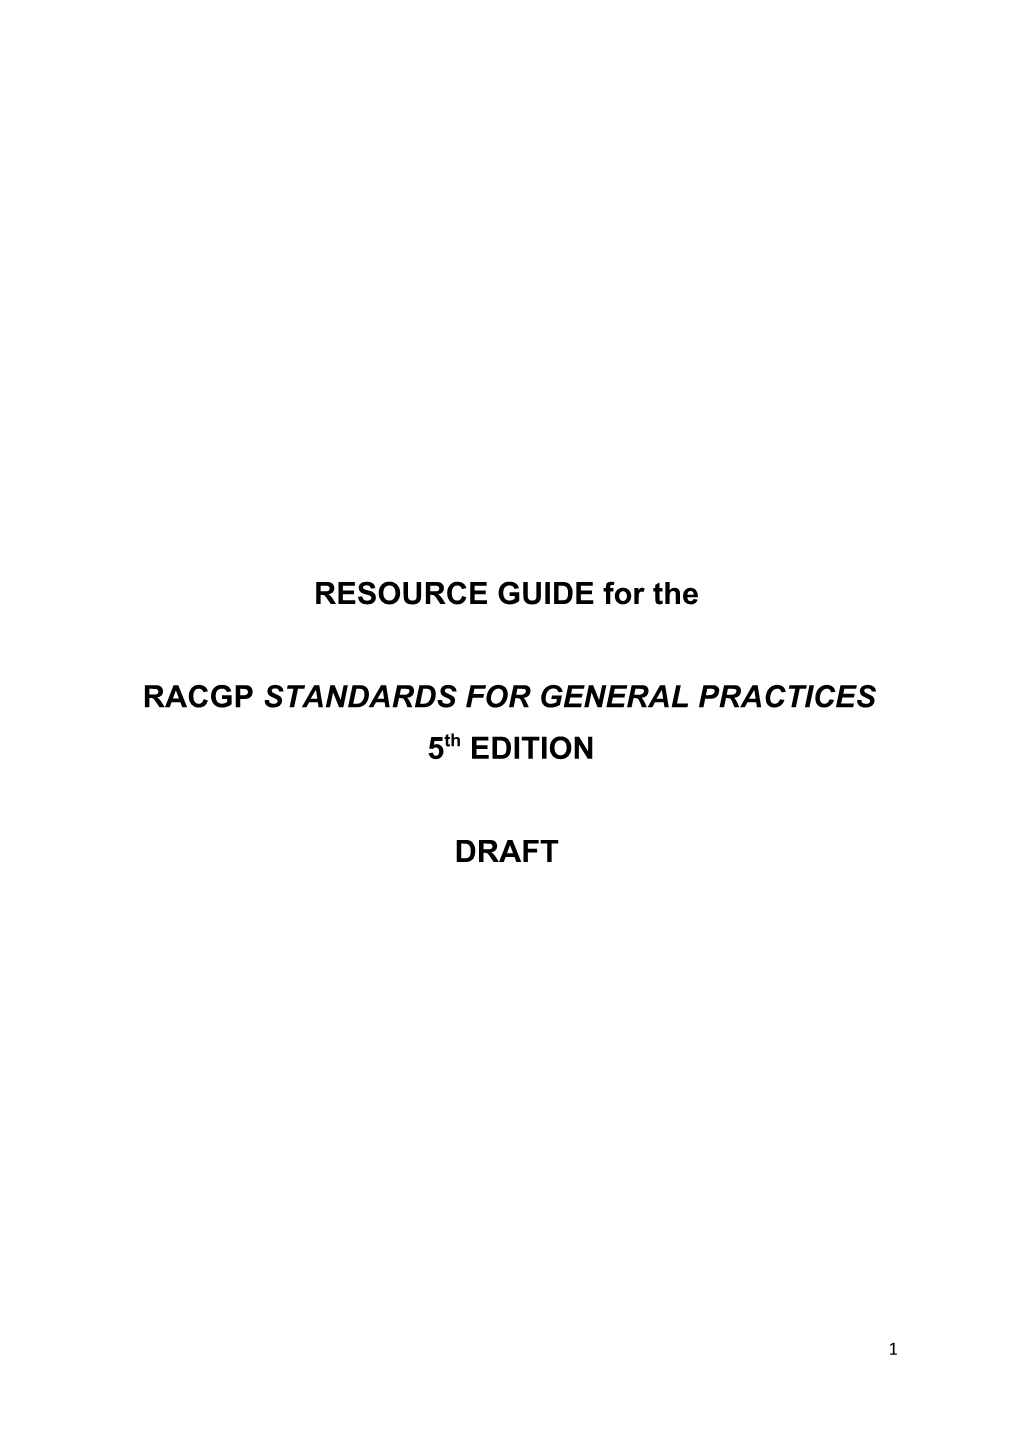 Racgp Standards for General Practices